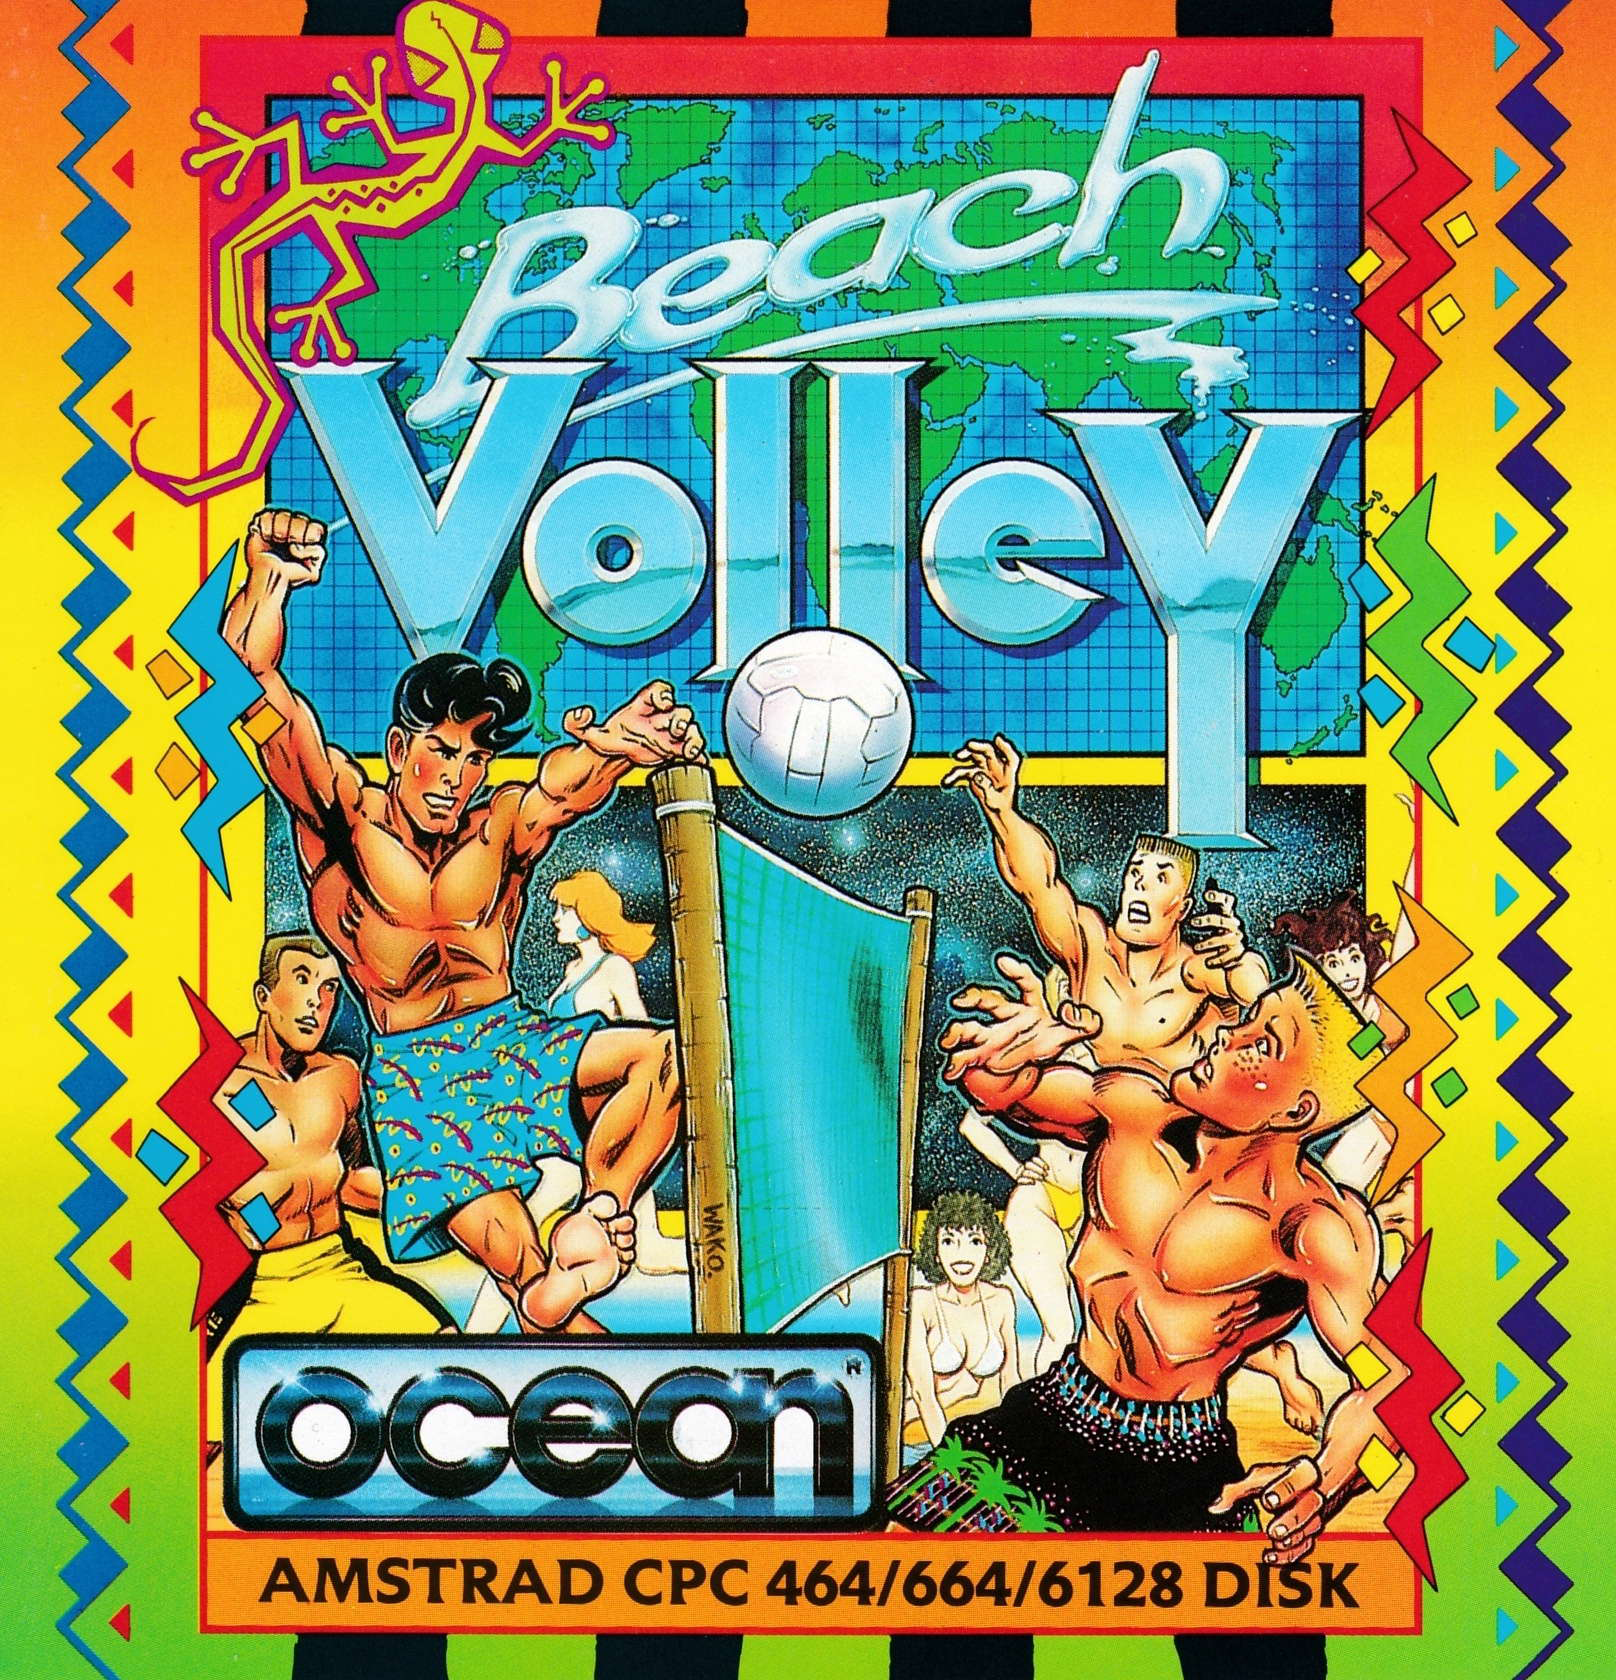 cover of the Amstrad CPC game Beach Volley  by GameBase CPC